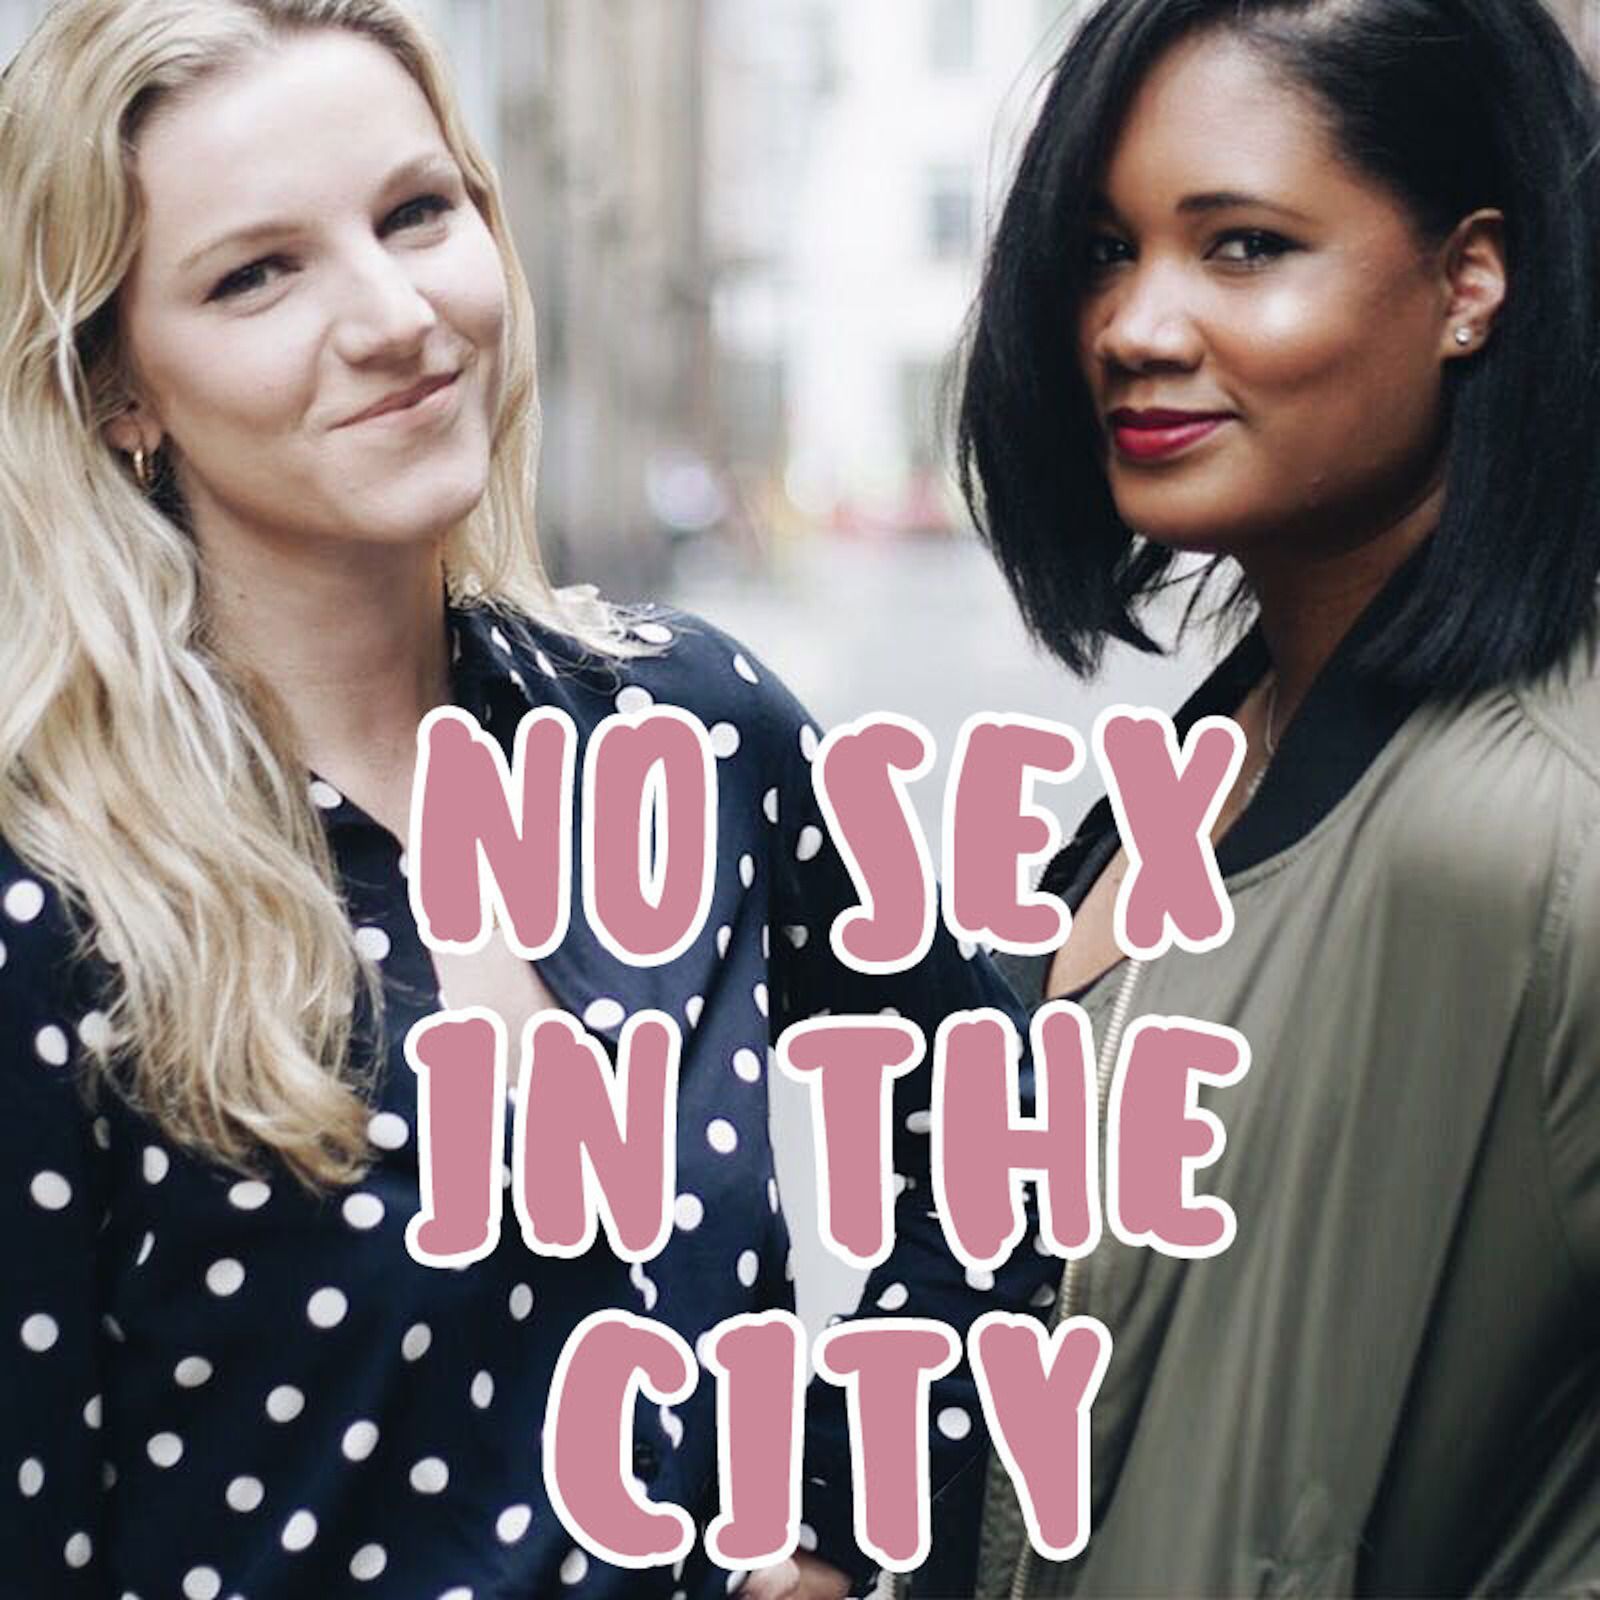 I say mum what. Dating in the City. Girls from whatever Podcast.